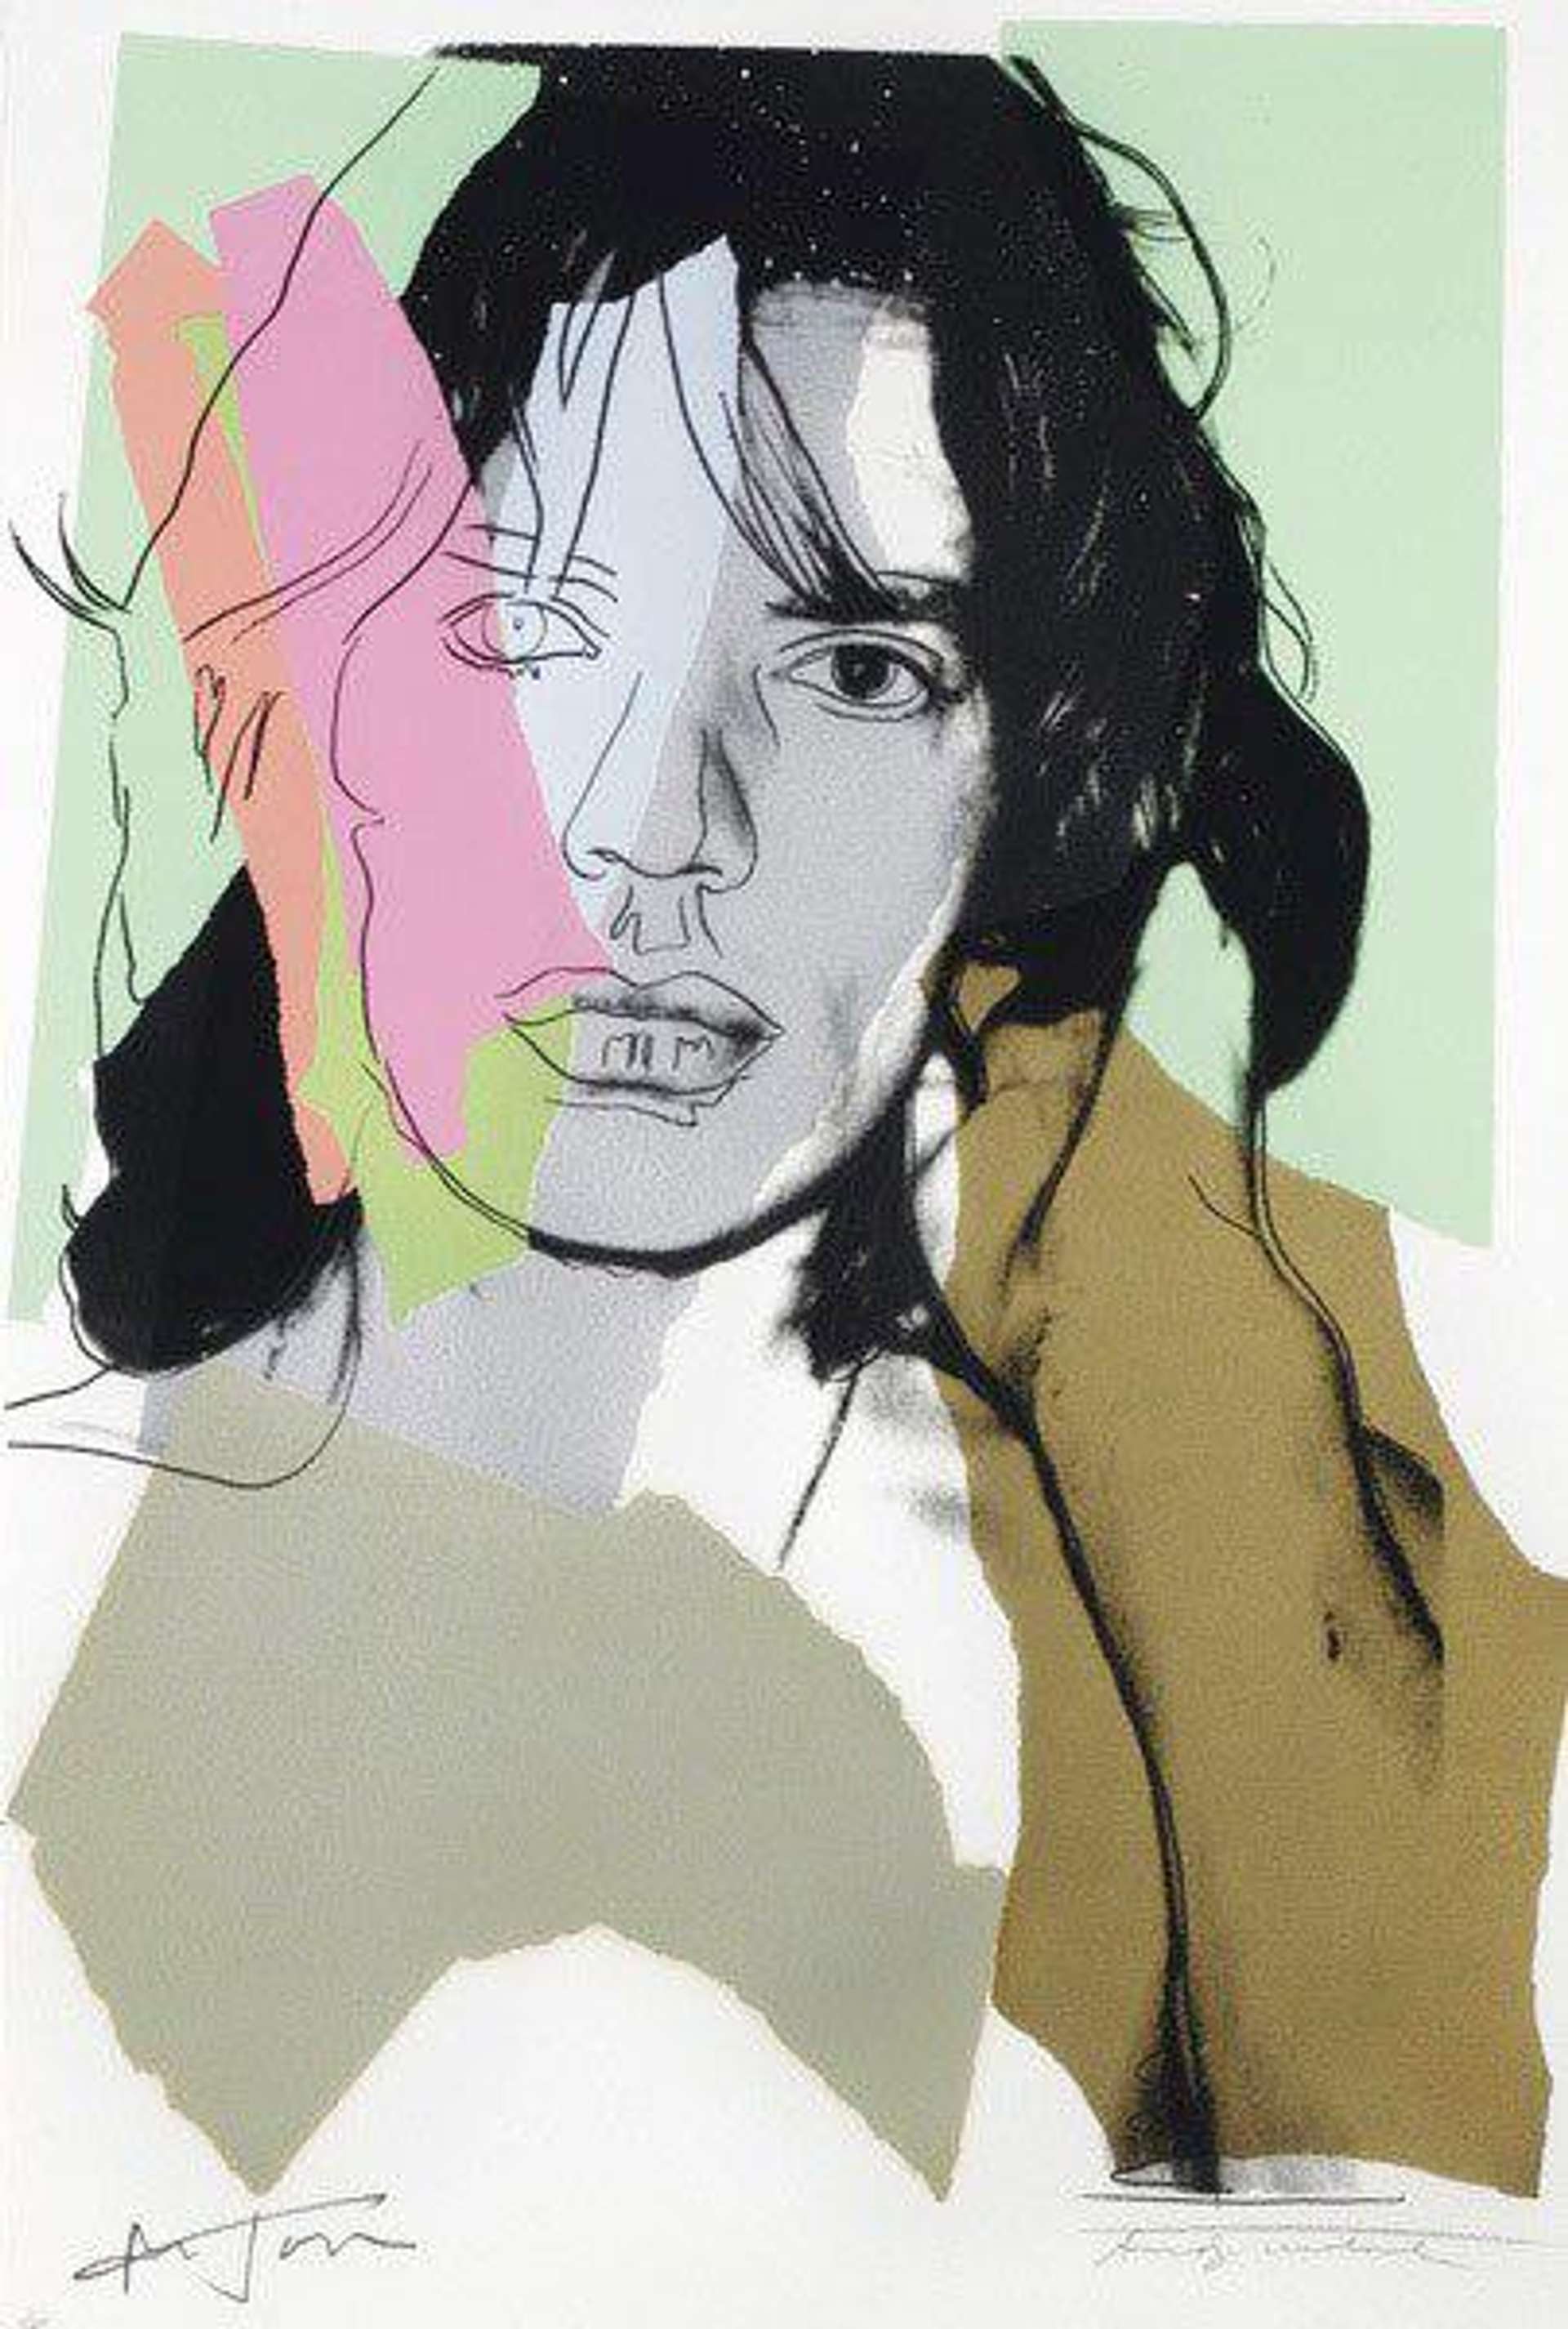 A screenprint by Andy Warhol depicting Rolling Stones frontman Mick Jagger in black ink over collaged blocks of green, gold and pink.